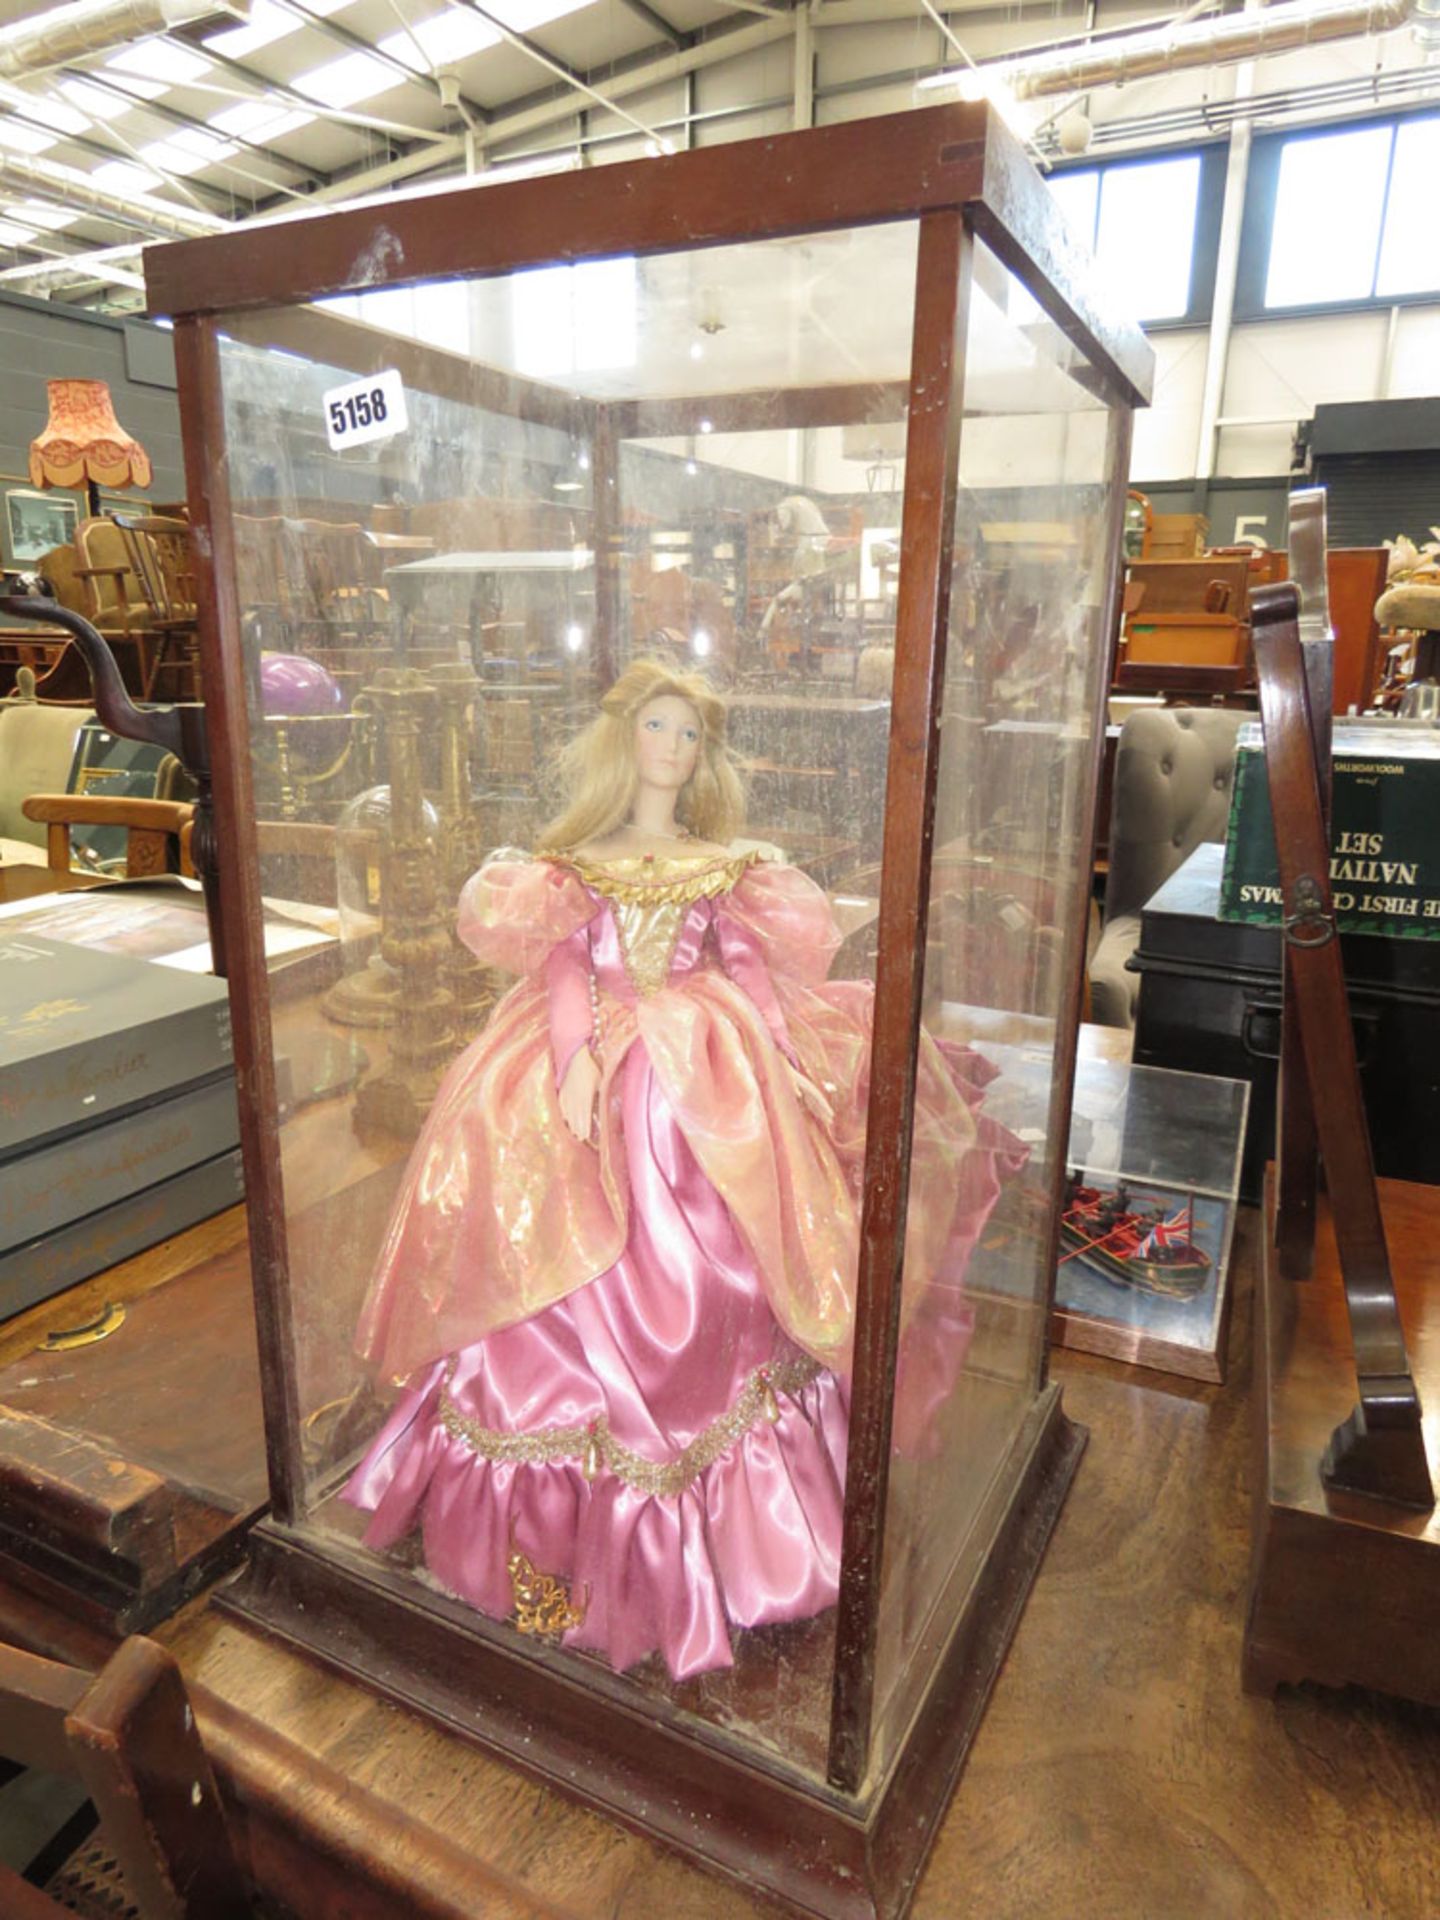 Display case with a figure of Cinderella